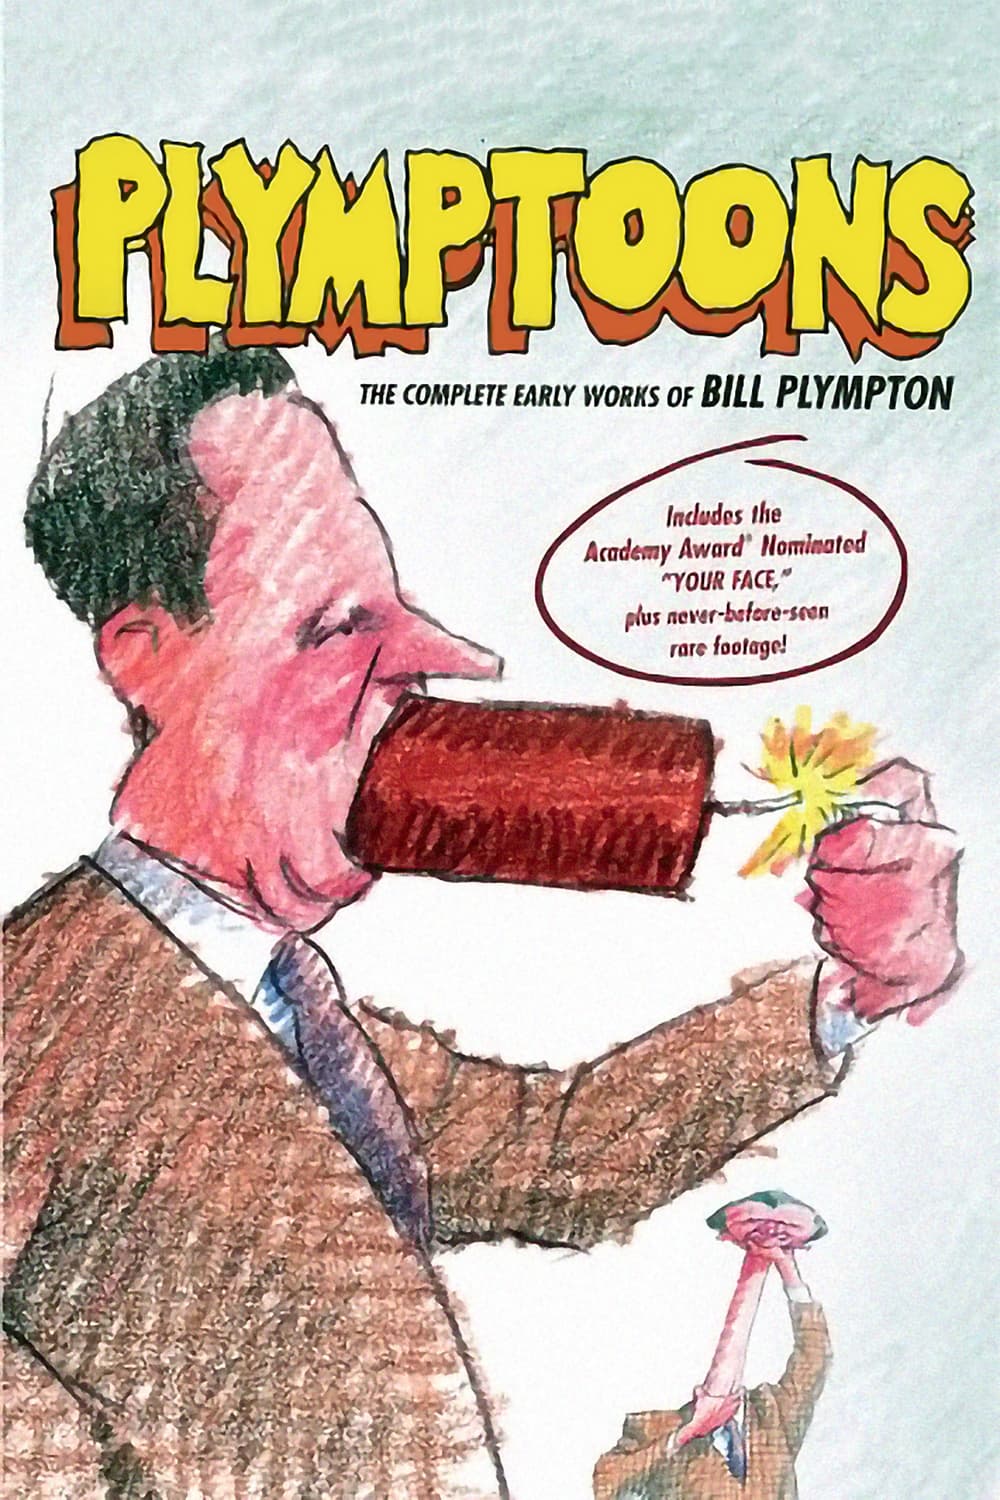 Plymptoons: The Complete Early Works of Bill Plympton